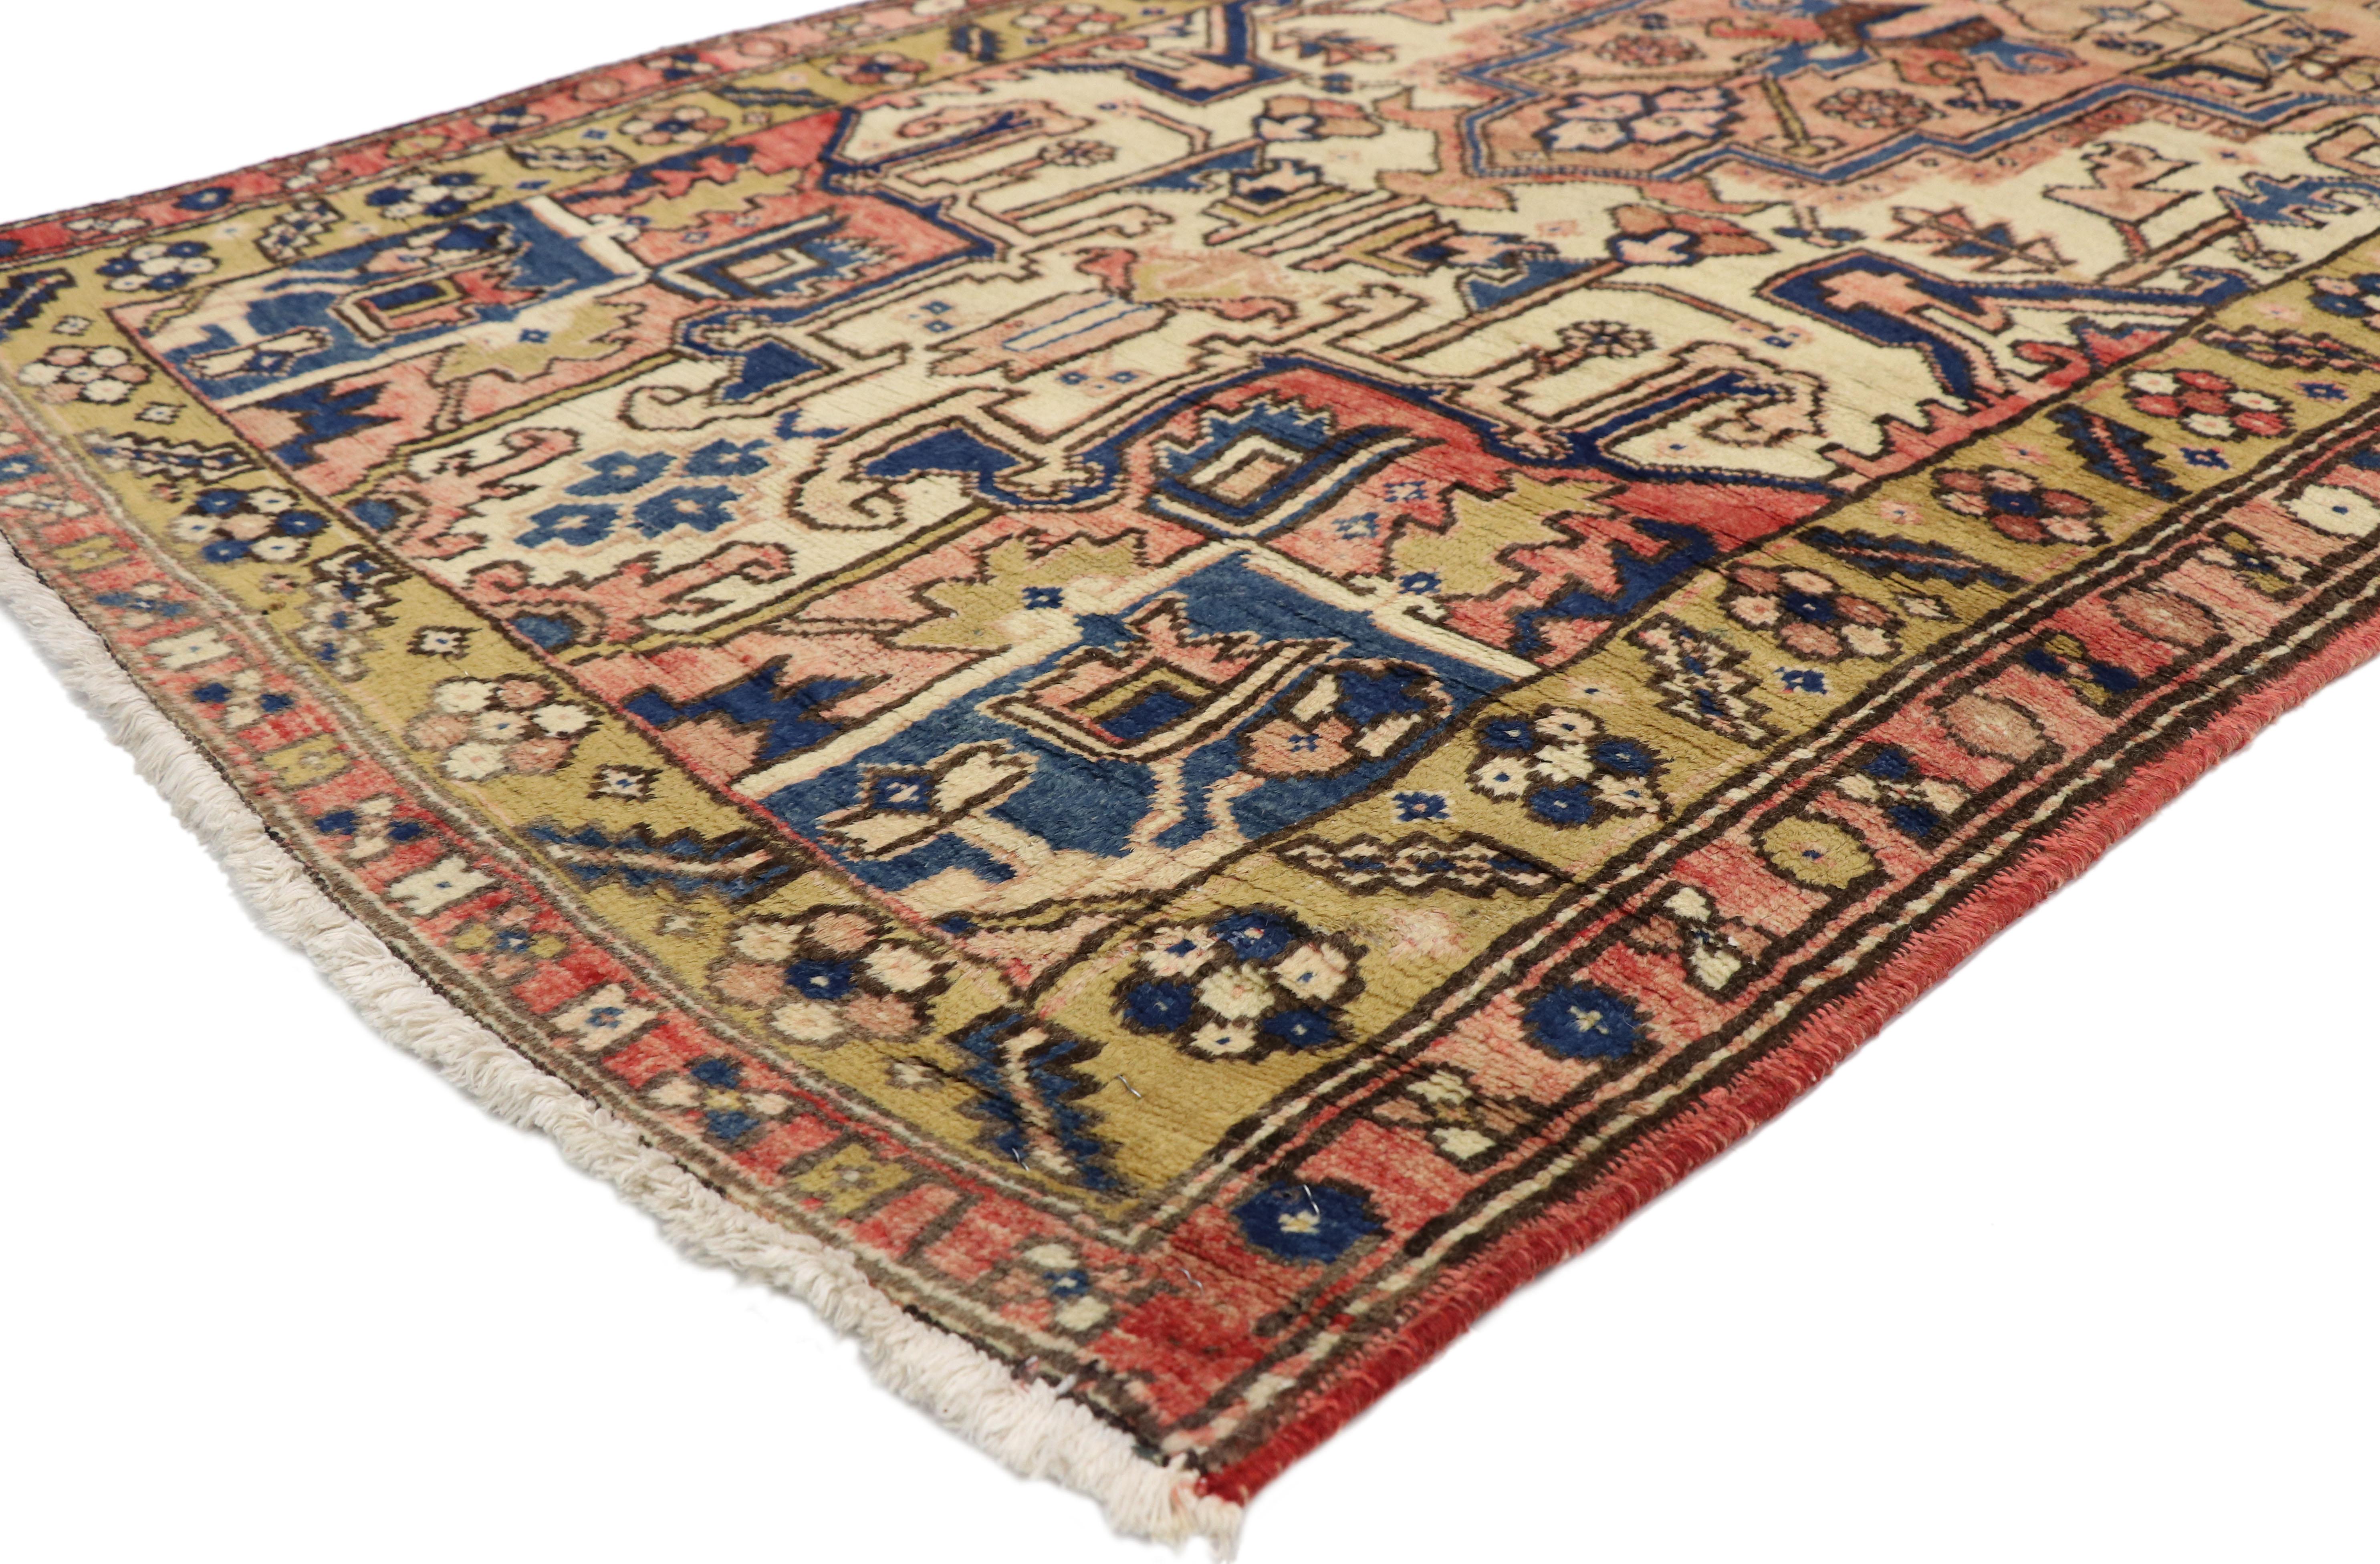 76406 Vintage Persian Heriz Runner with Mid-Century Modern Bohemian Style. With a bold, geometric design and well-balanced details combined with symmetry and elegance, this hand-knotted wool vintage Persian Heriz rug features traditional Heriz